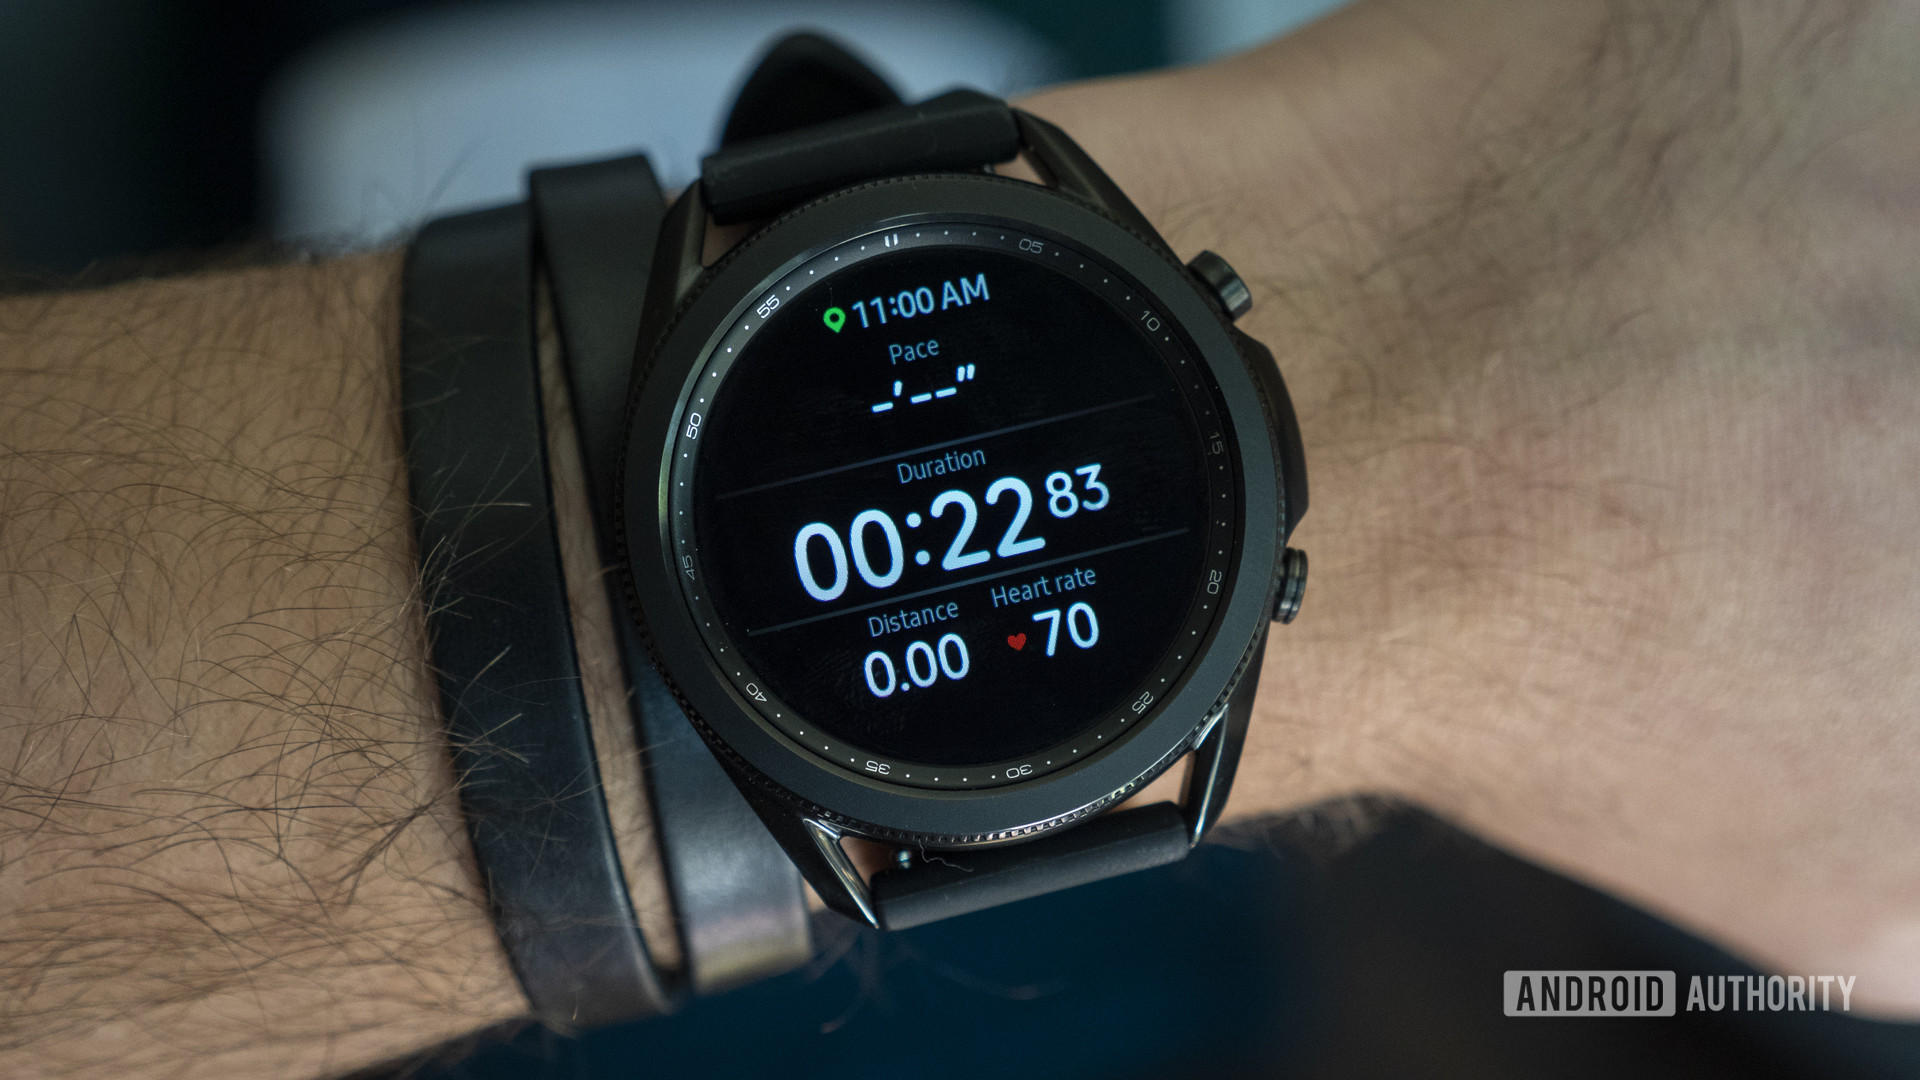 A user reviews his running workout on his Samsung Galaxy Watch 3 